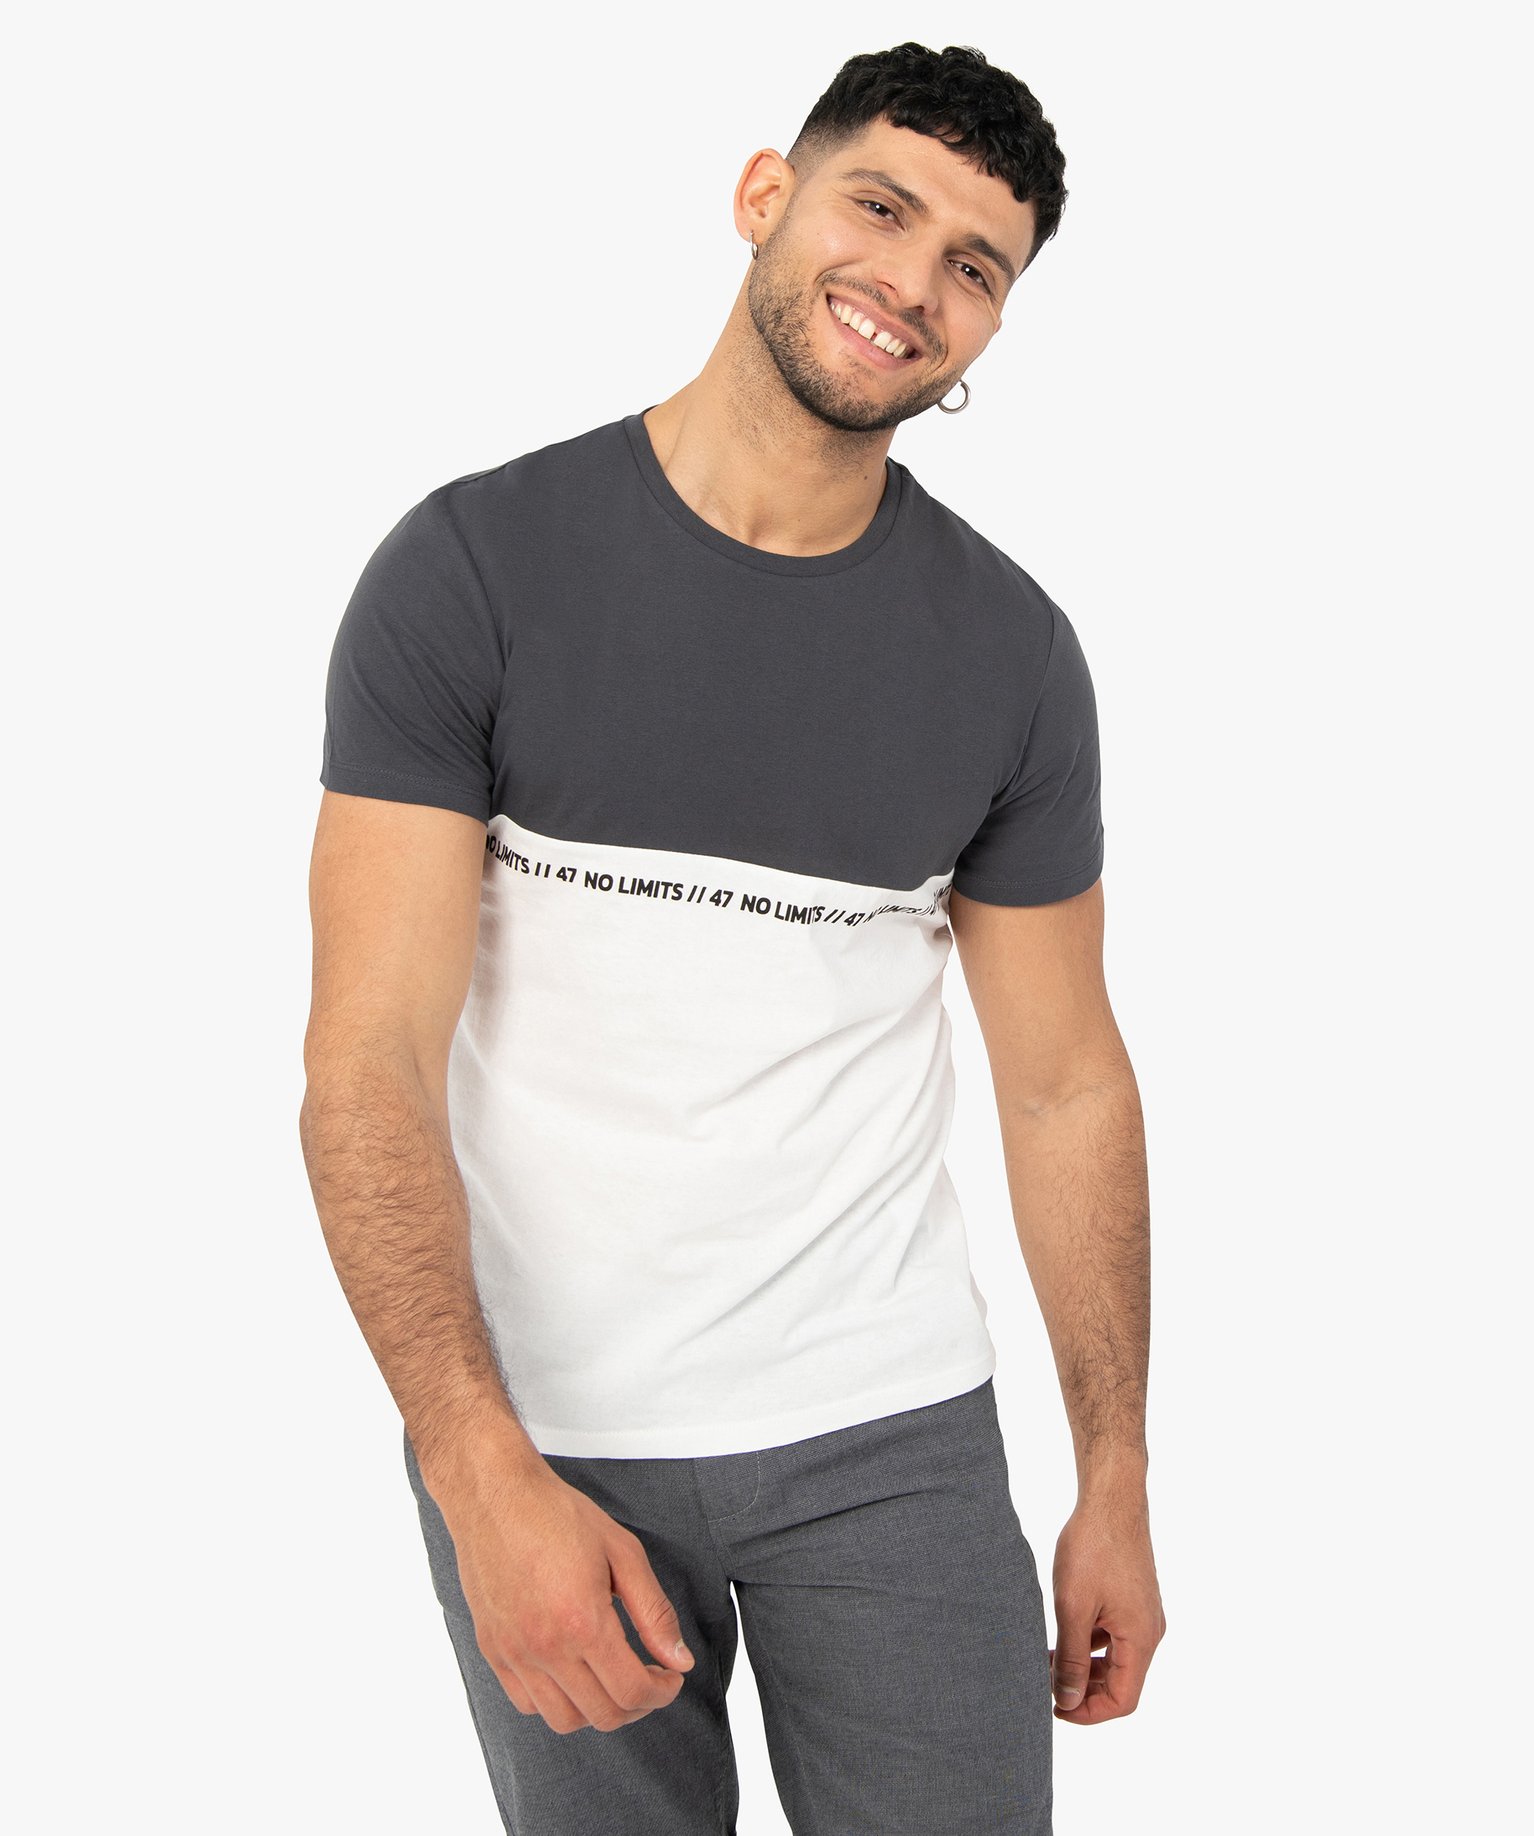 tee-shirt homme a manches courtes bicolore gris tee-shirts